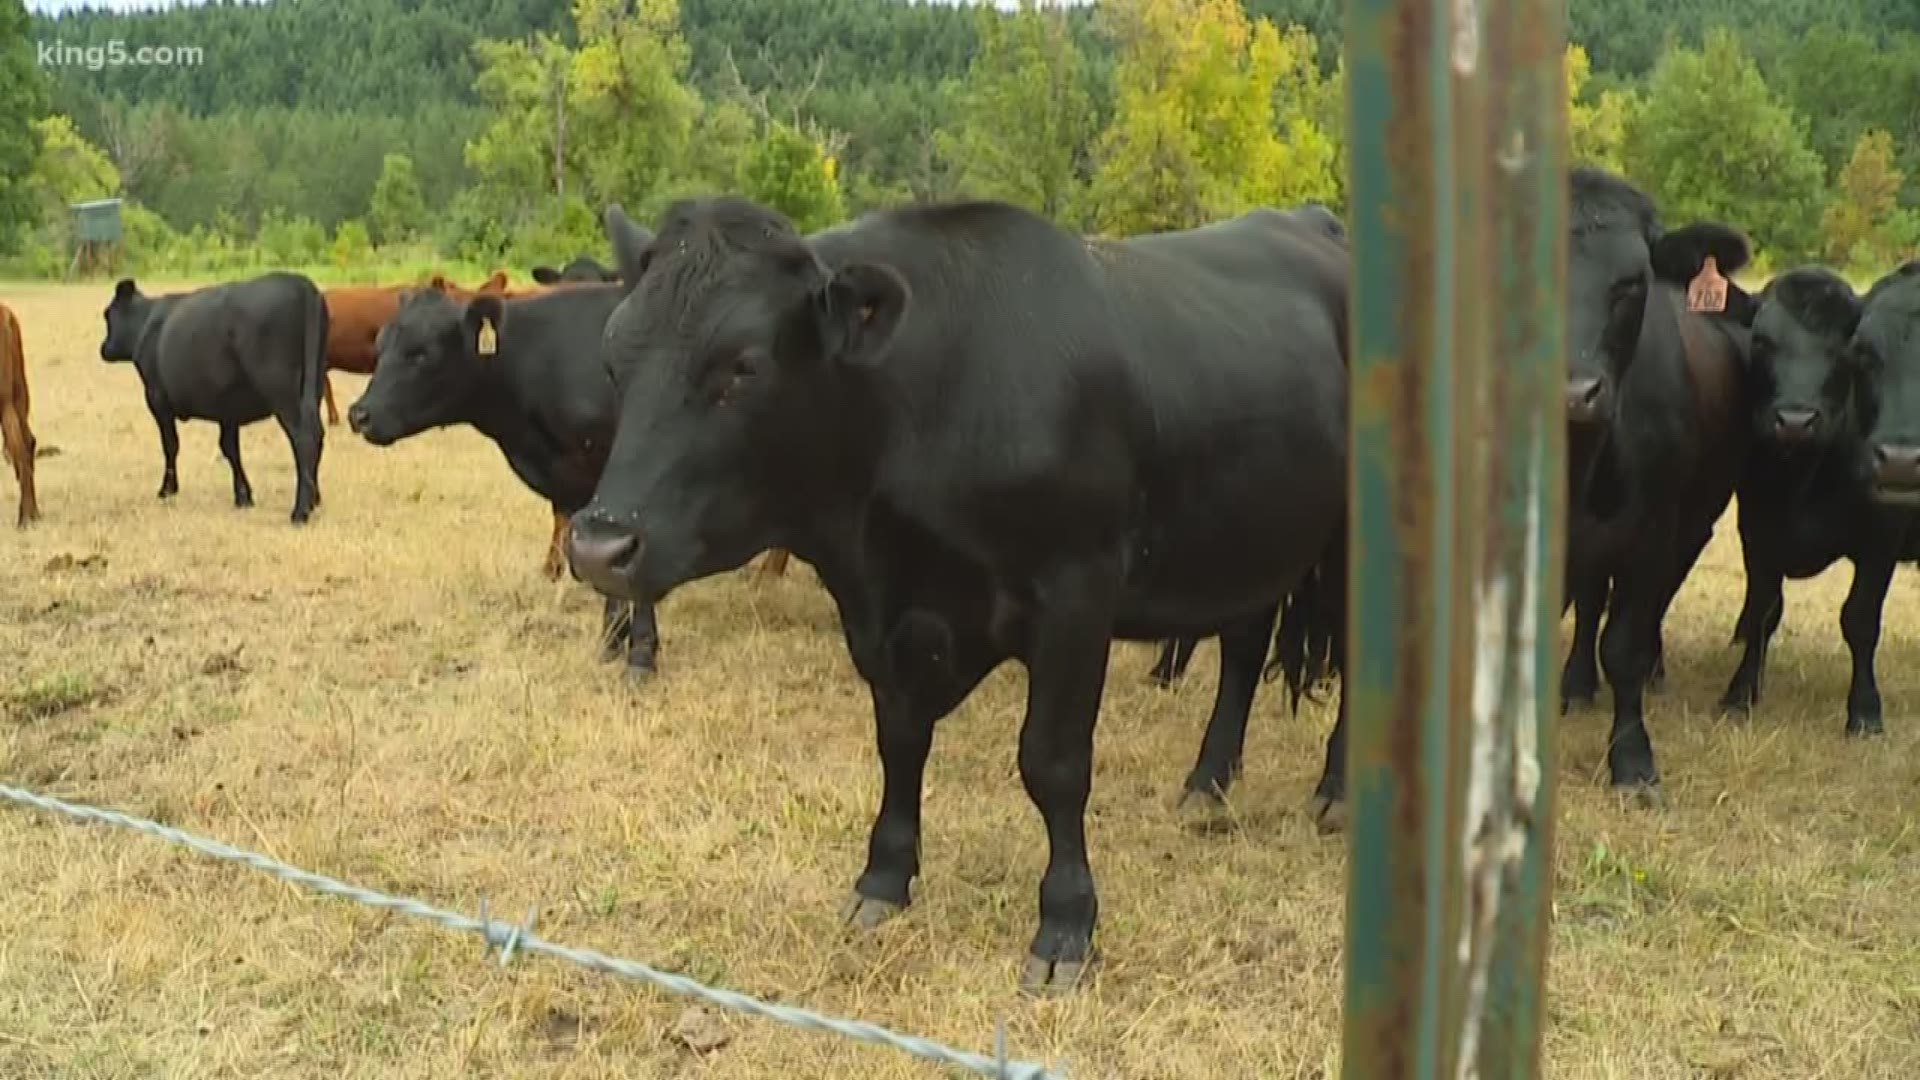 A new United Nations report calls for re-thinking our eating and farming habits. The U.N. panel on climate change said reducing meat production could help reduce carbon emissions. A Thurston County rancher spoke out about how those changes would affect his way of life.